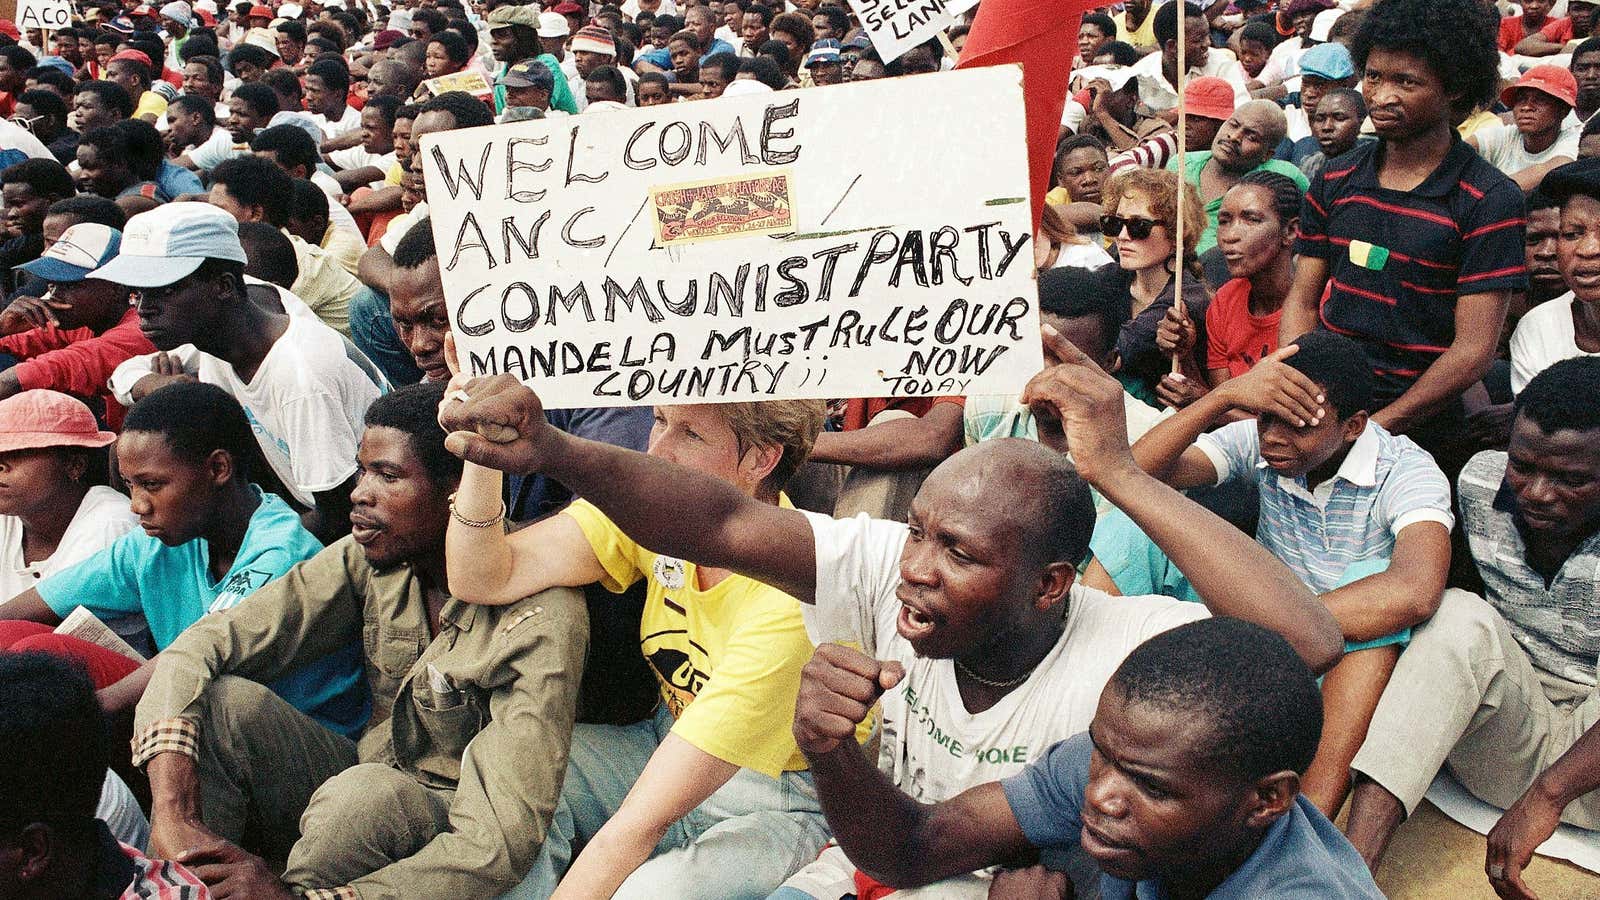 Anti-government protesters chant and sing at a rally at Alexandra Township, Feb. 3, 1990 in Johannesburg, the day after state President de Klerk announced the unbanning of the ANC and other anti-apartheid organizations.